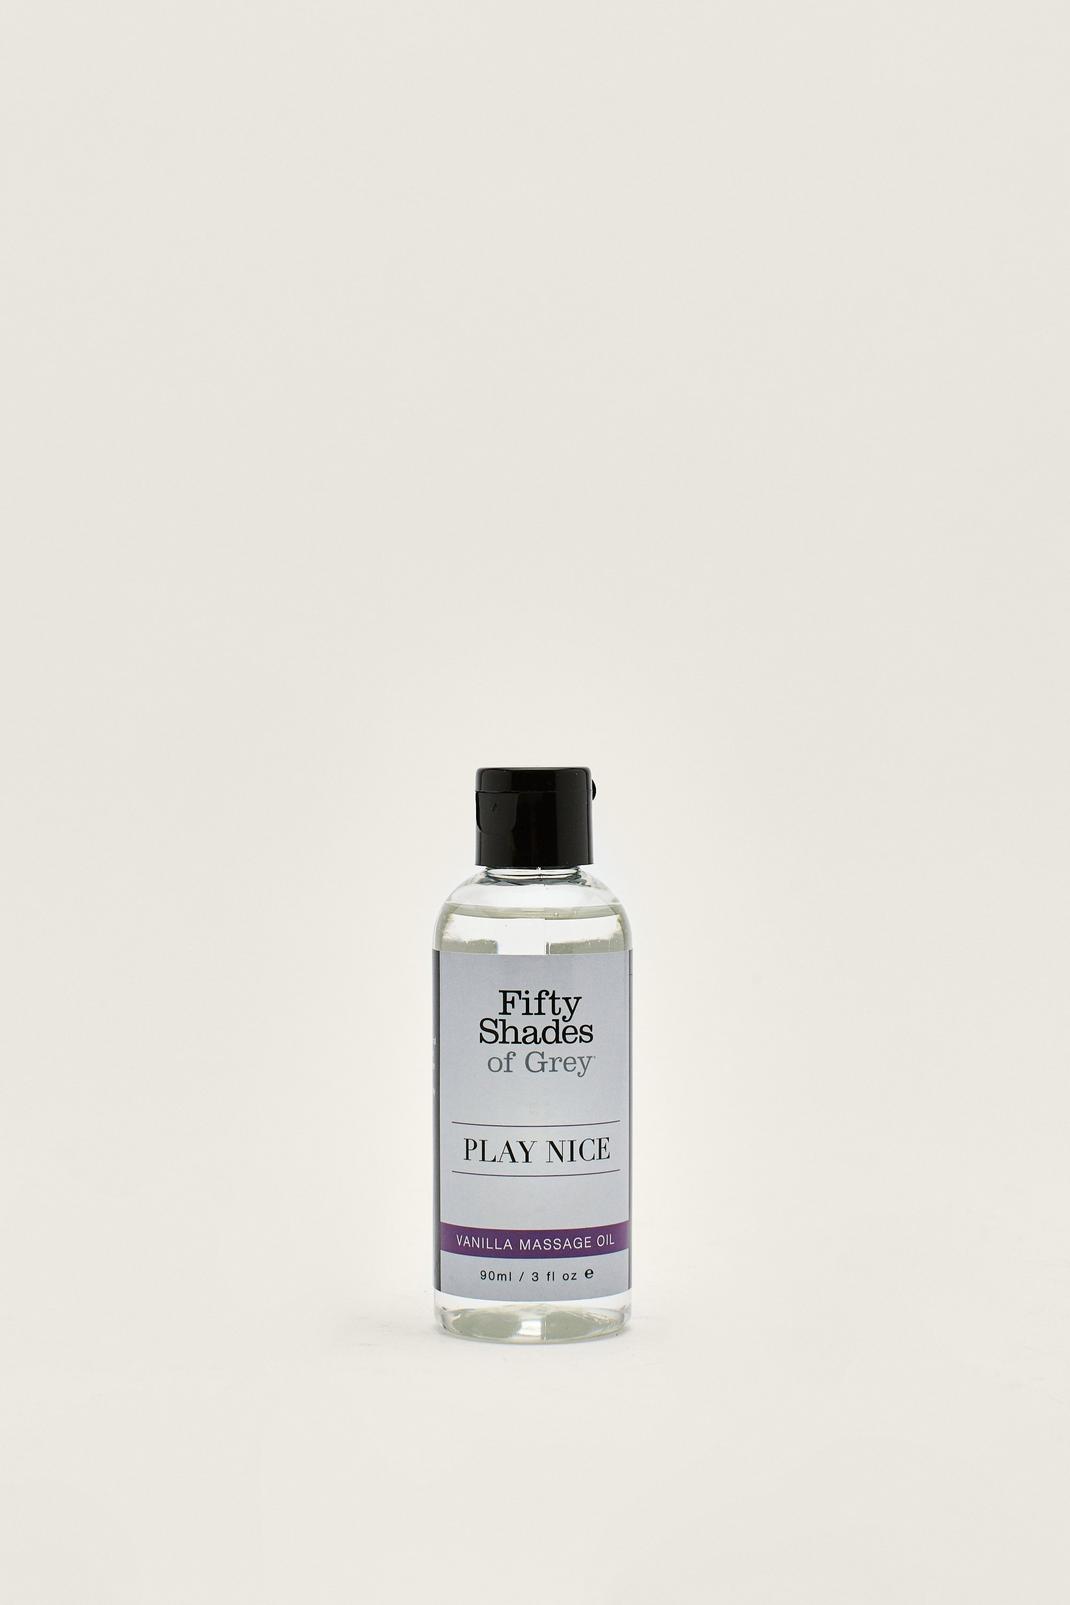 Fifty Shades of Grey Massage Oil